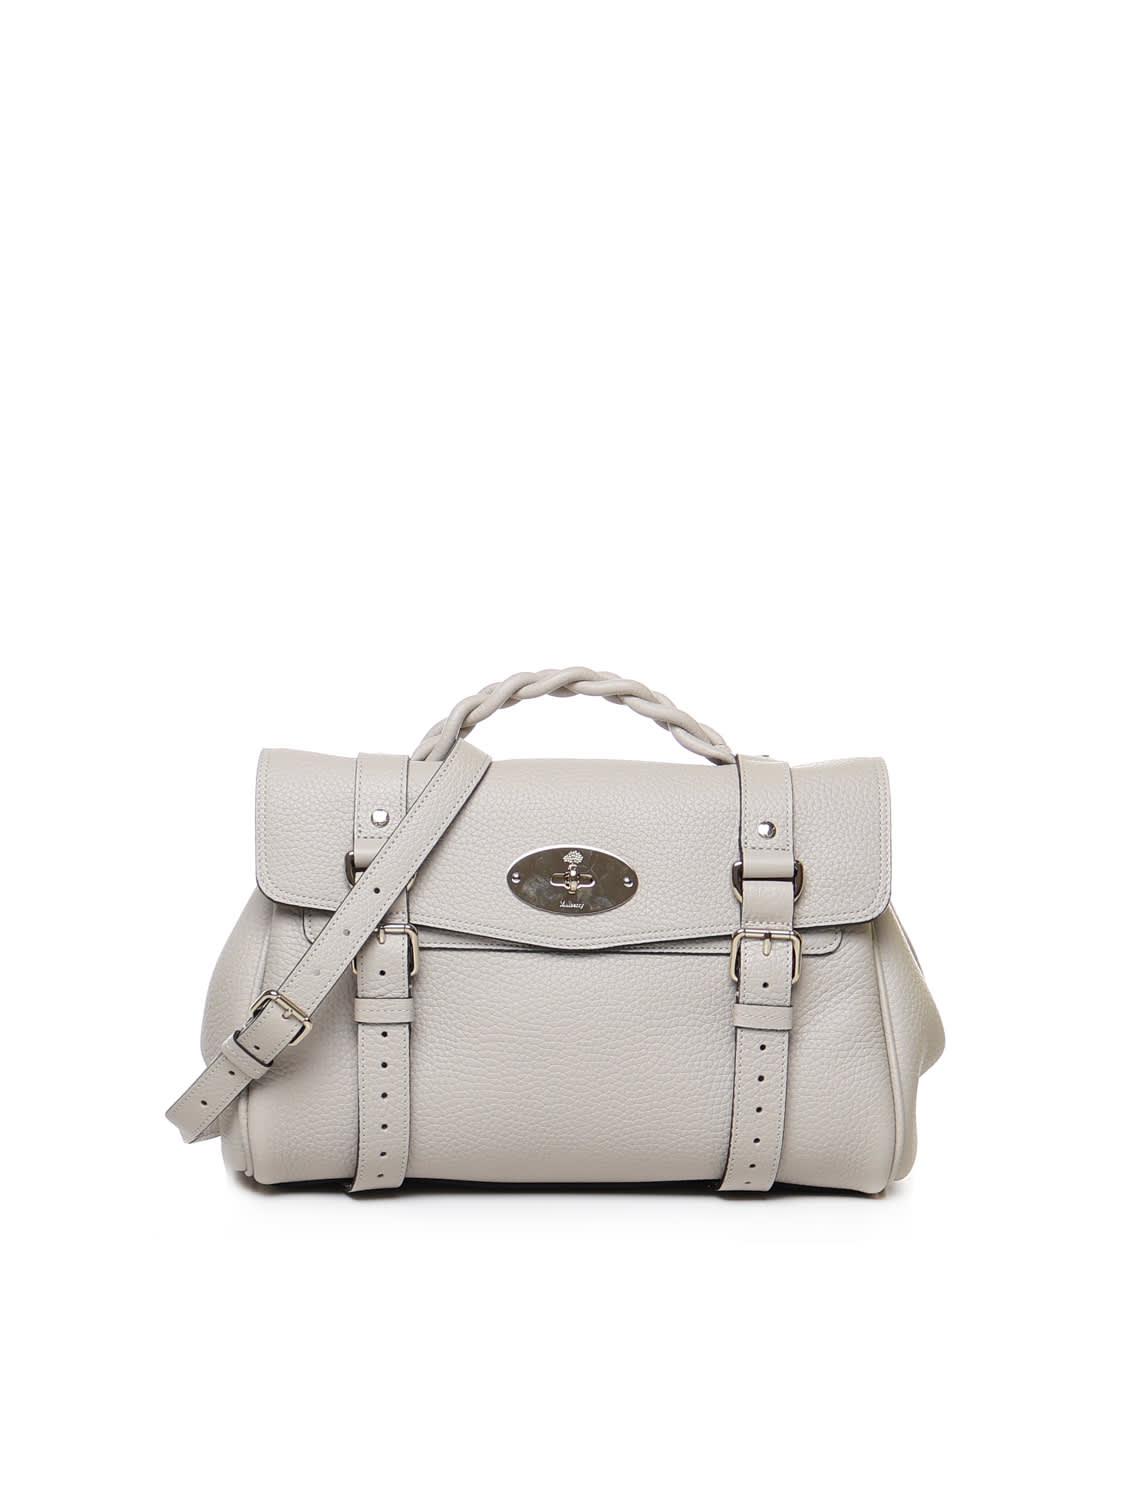 Mulberry Alexa Leather Shoulder Bag in White | Lyst